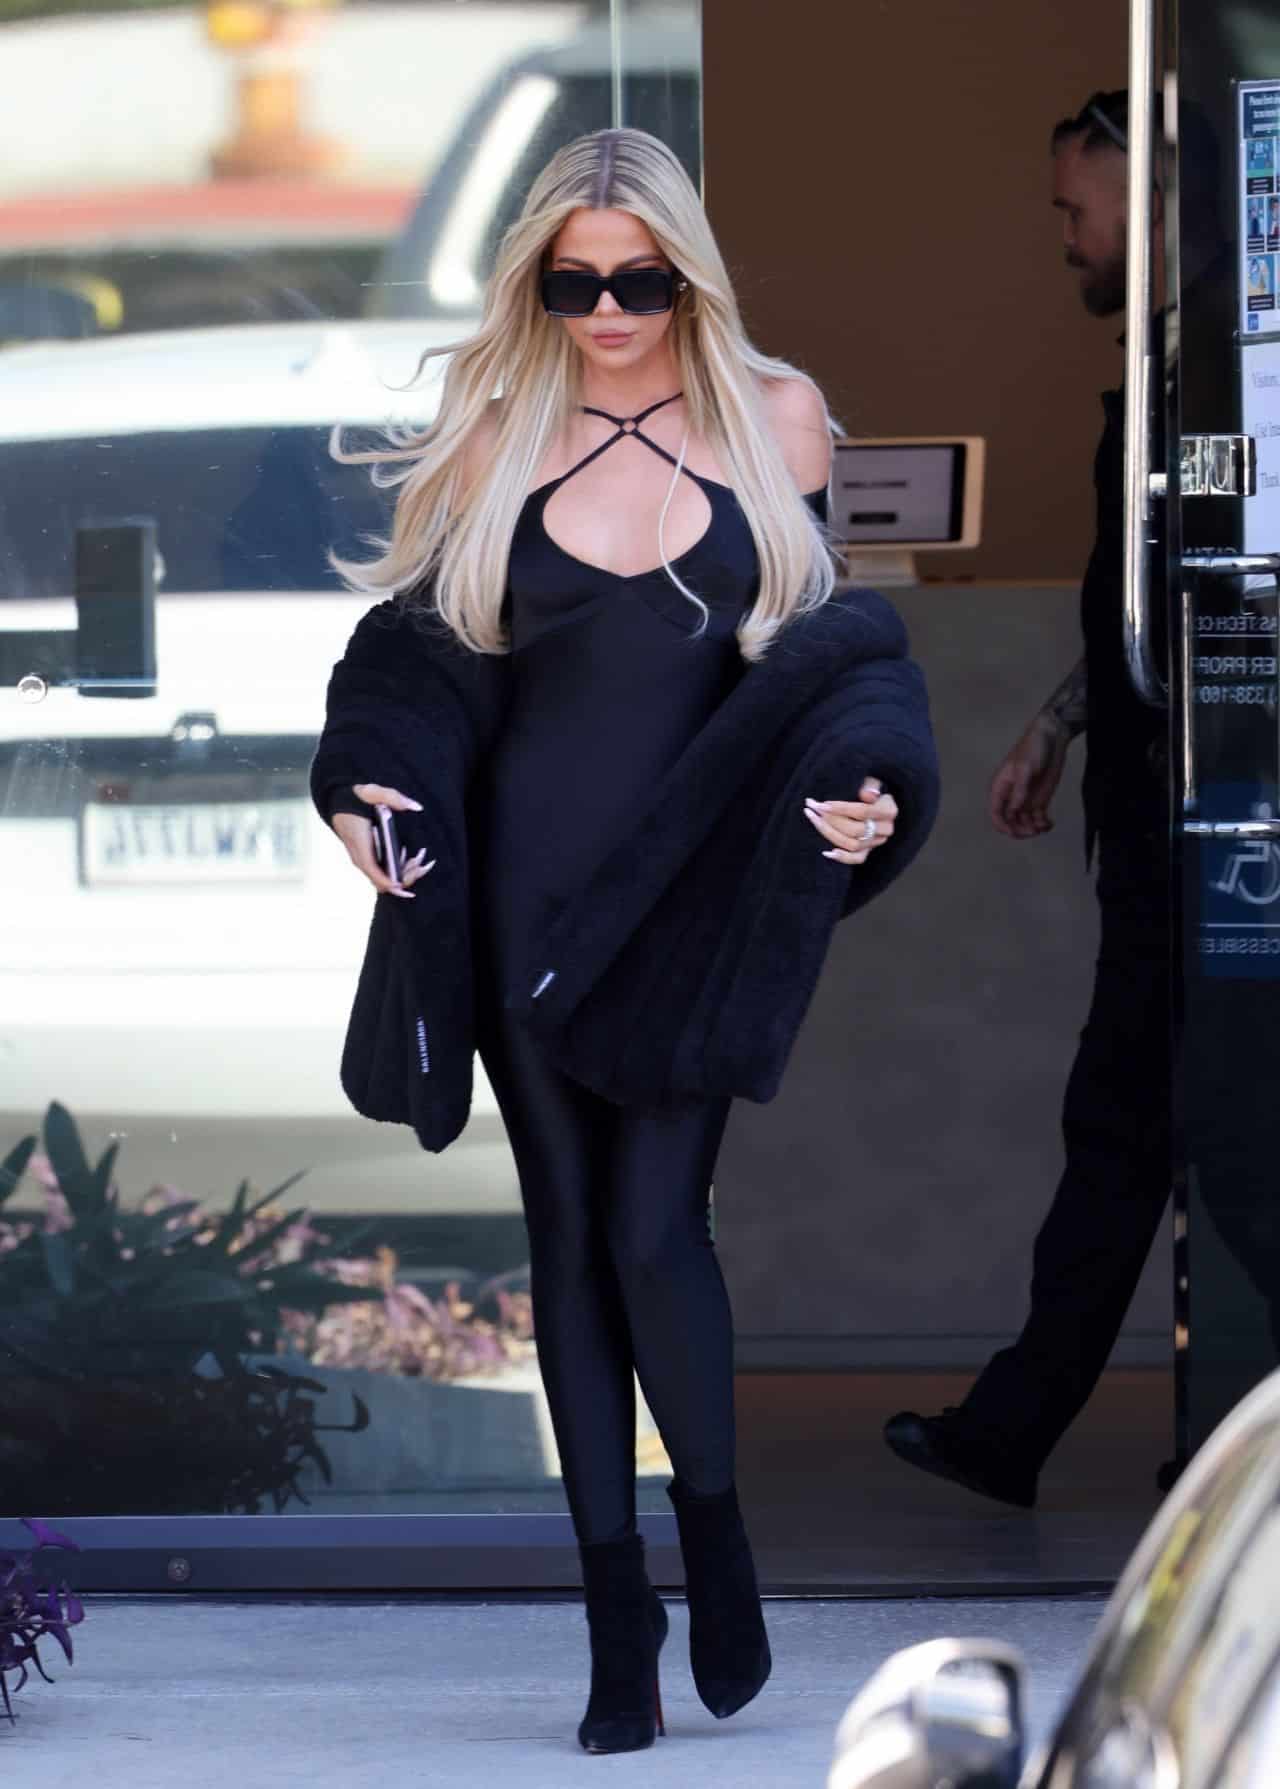 Khloe Kardashian Shows Off her Slim Figure in a Black Catsuit and Fur Coat